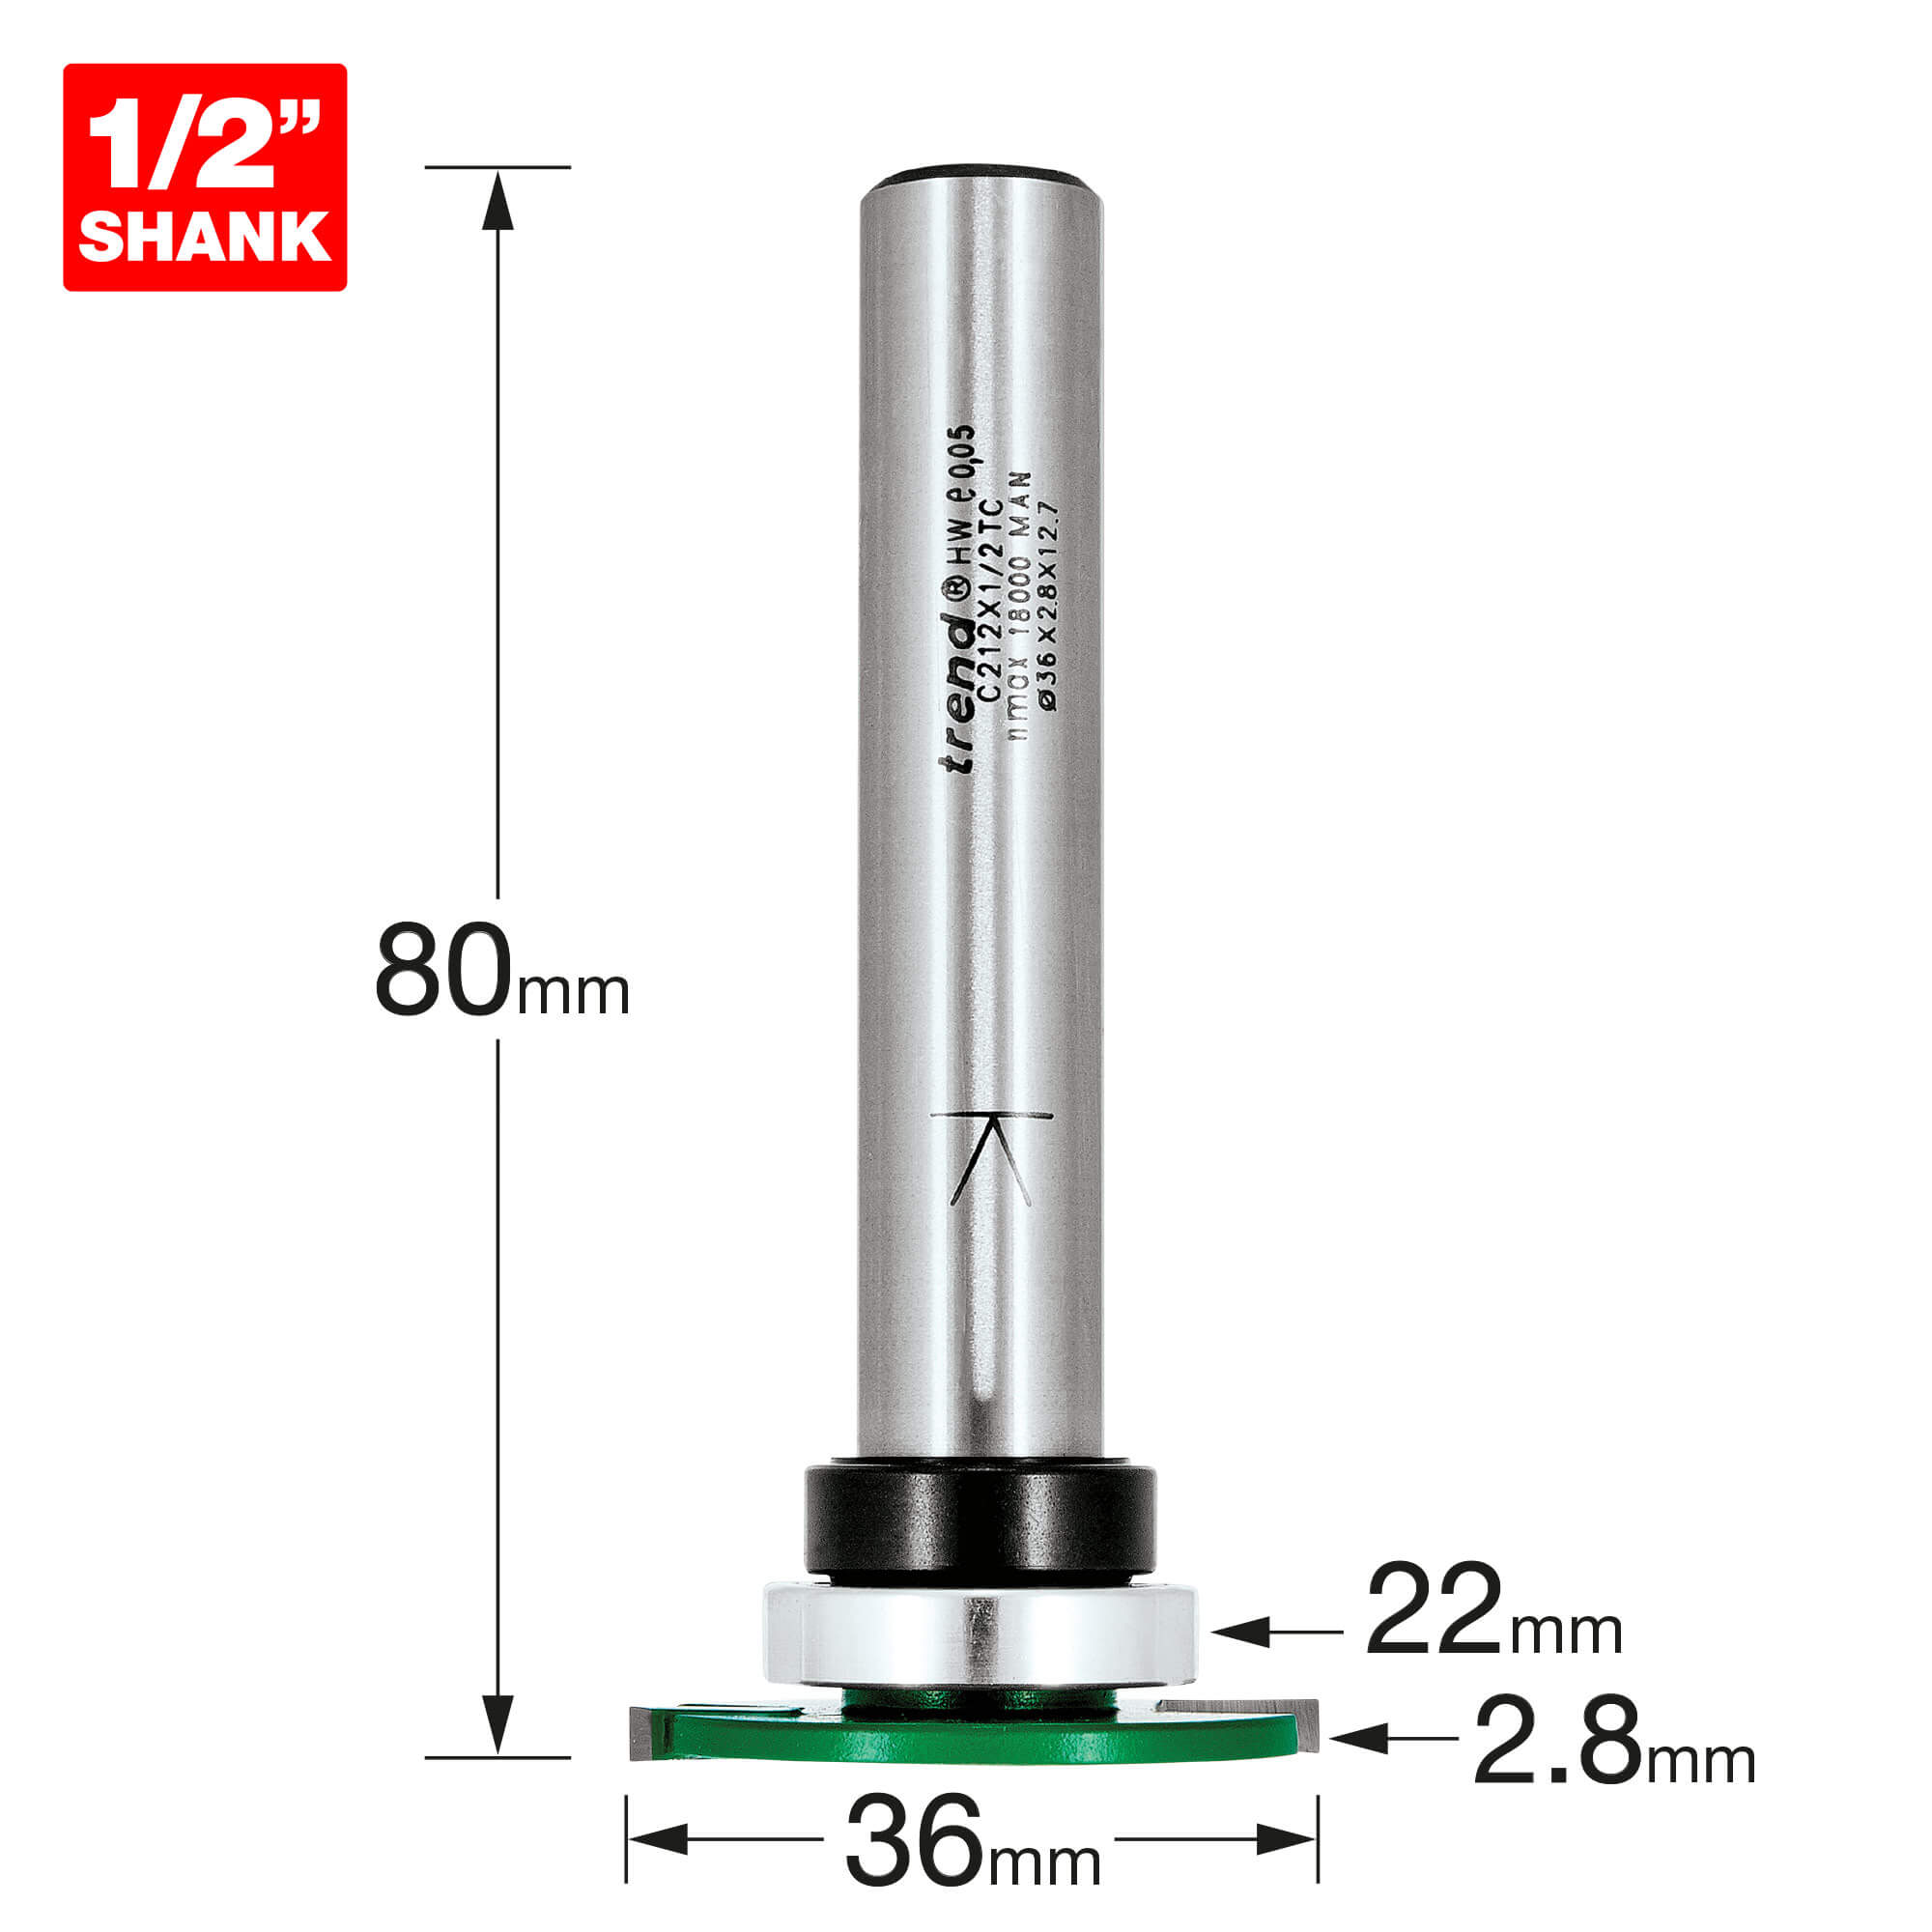 Image of Trend CRAFTPRO Weatherseal Groover Router Cutter 36mm 2.8mm 1/2"